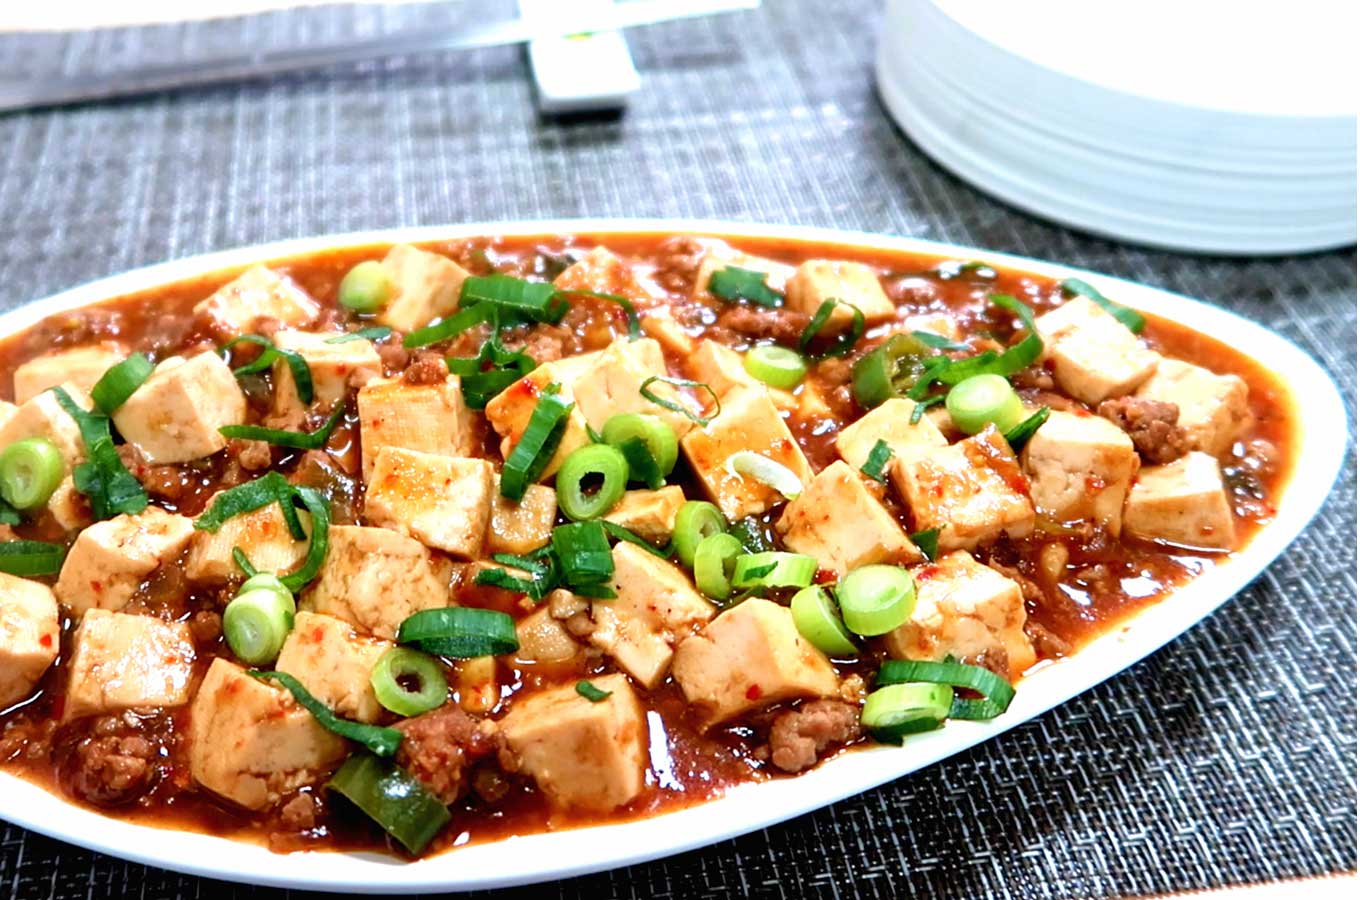 Order Chinese Food to Know What Your Fortune Cookie Says Quiz Mapo tofu